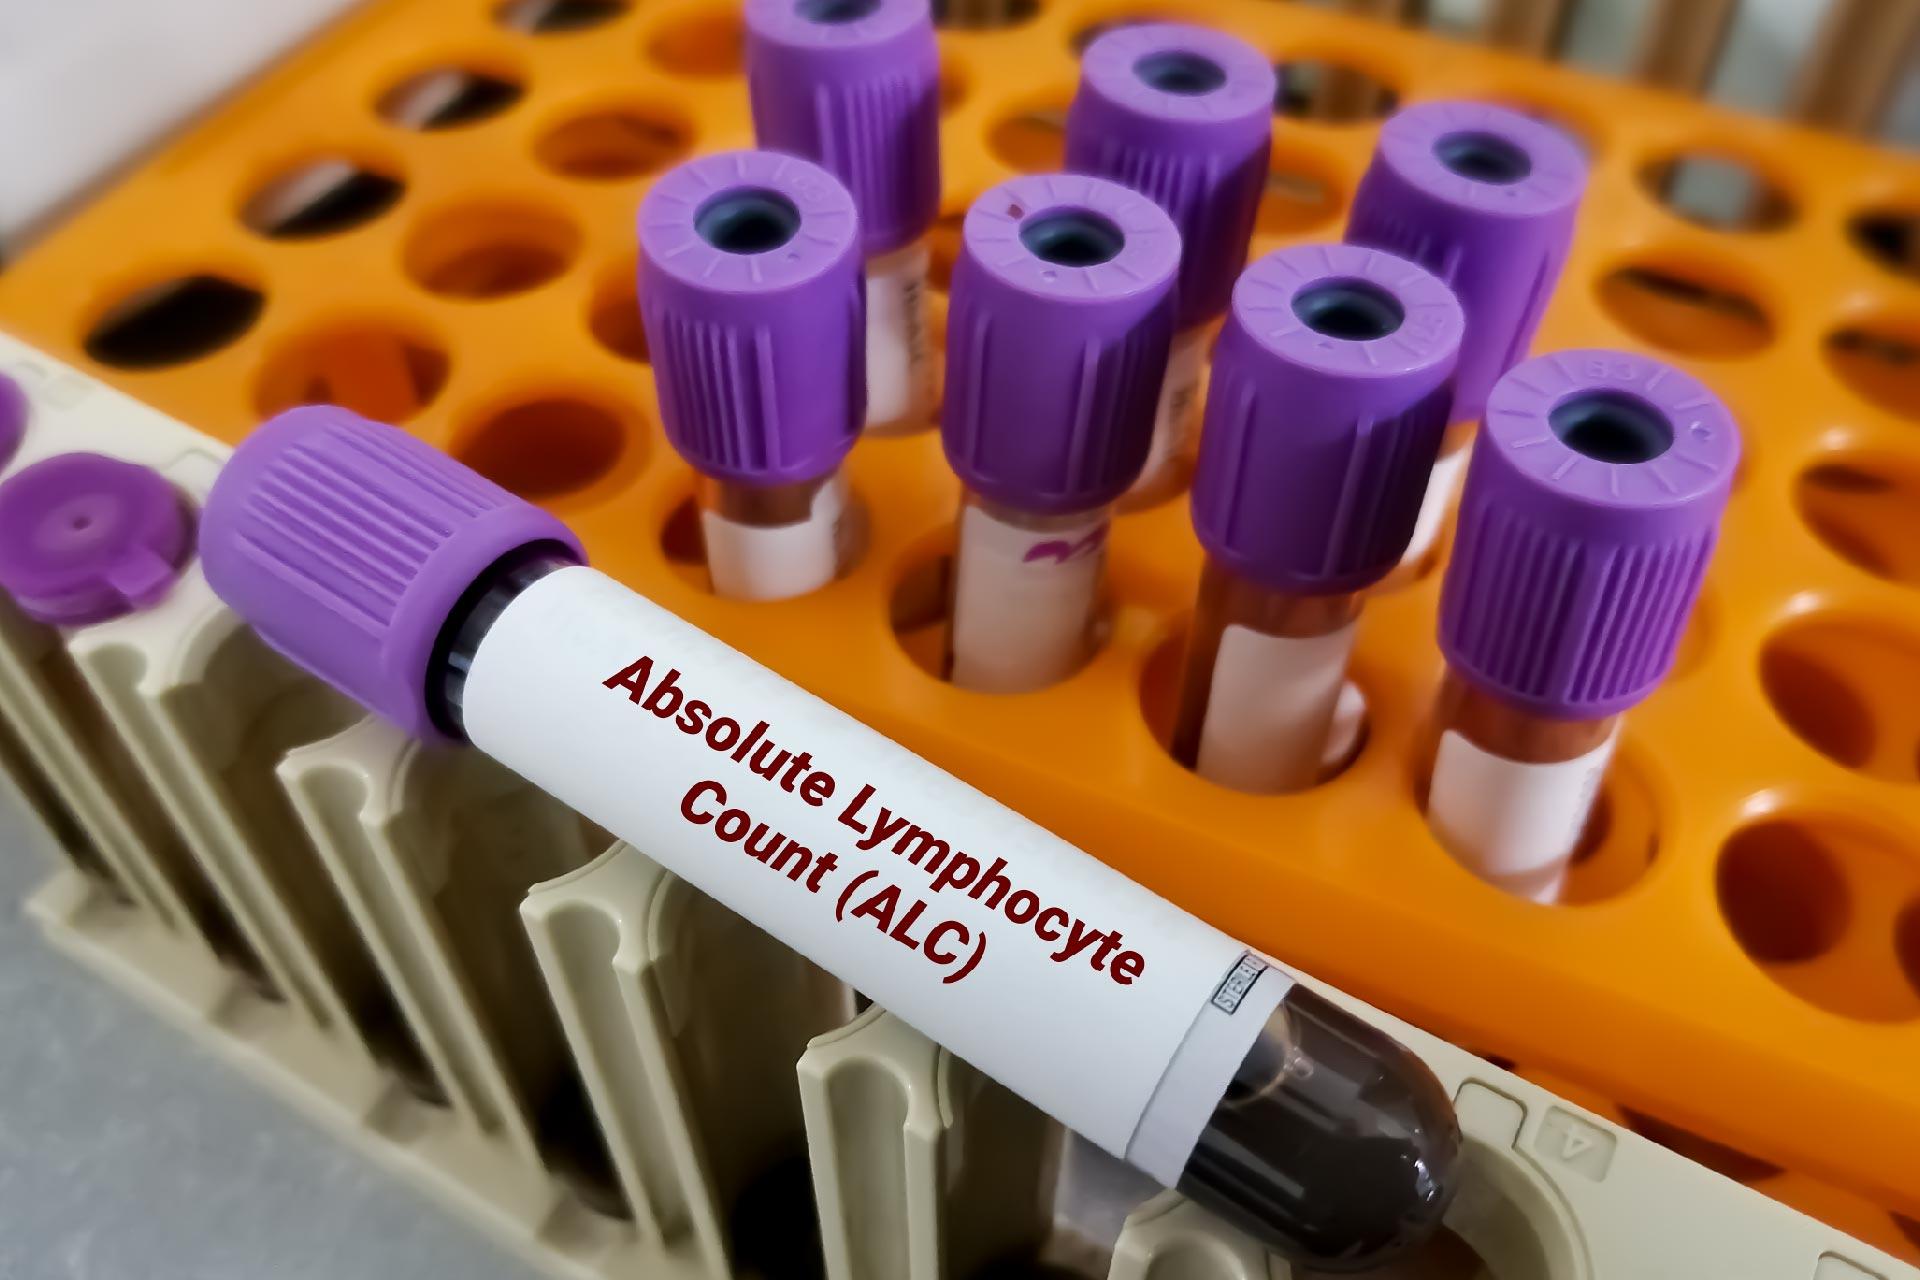 Absolute Lymphocyte Count Normal Range Indicates Good Health